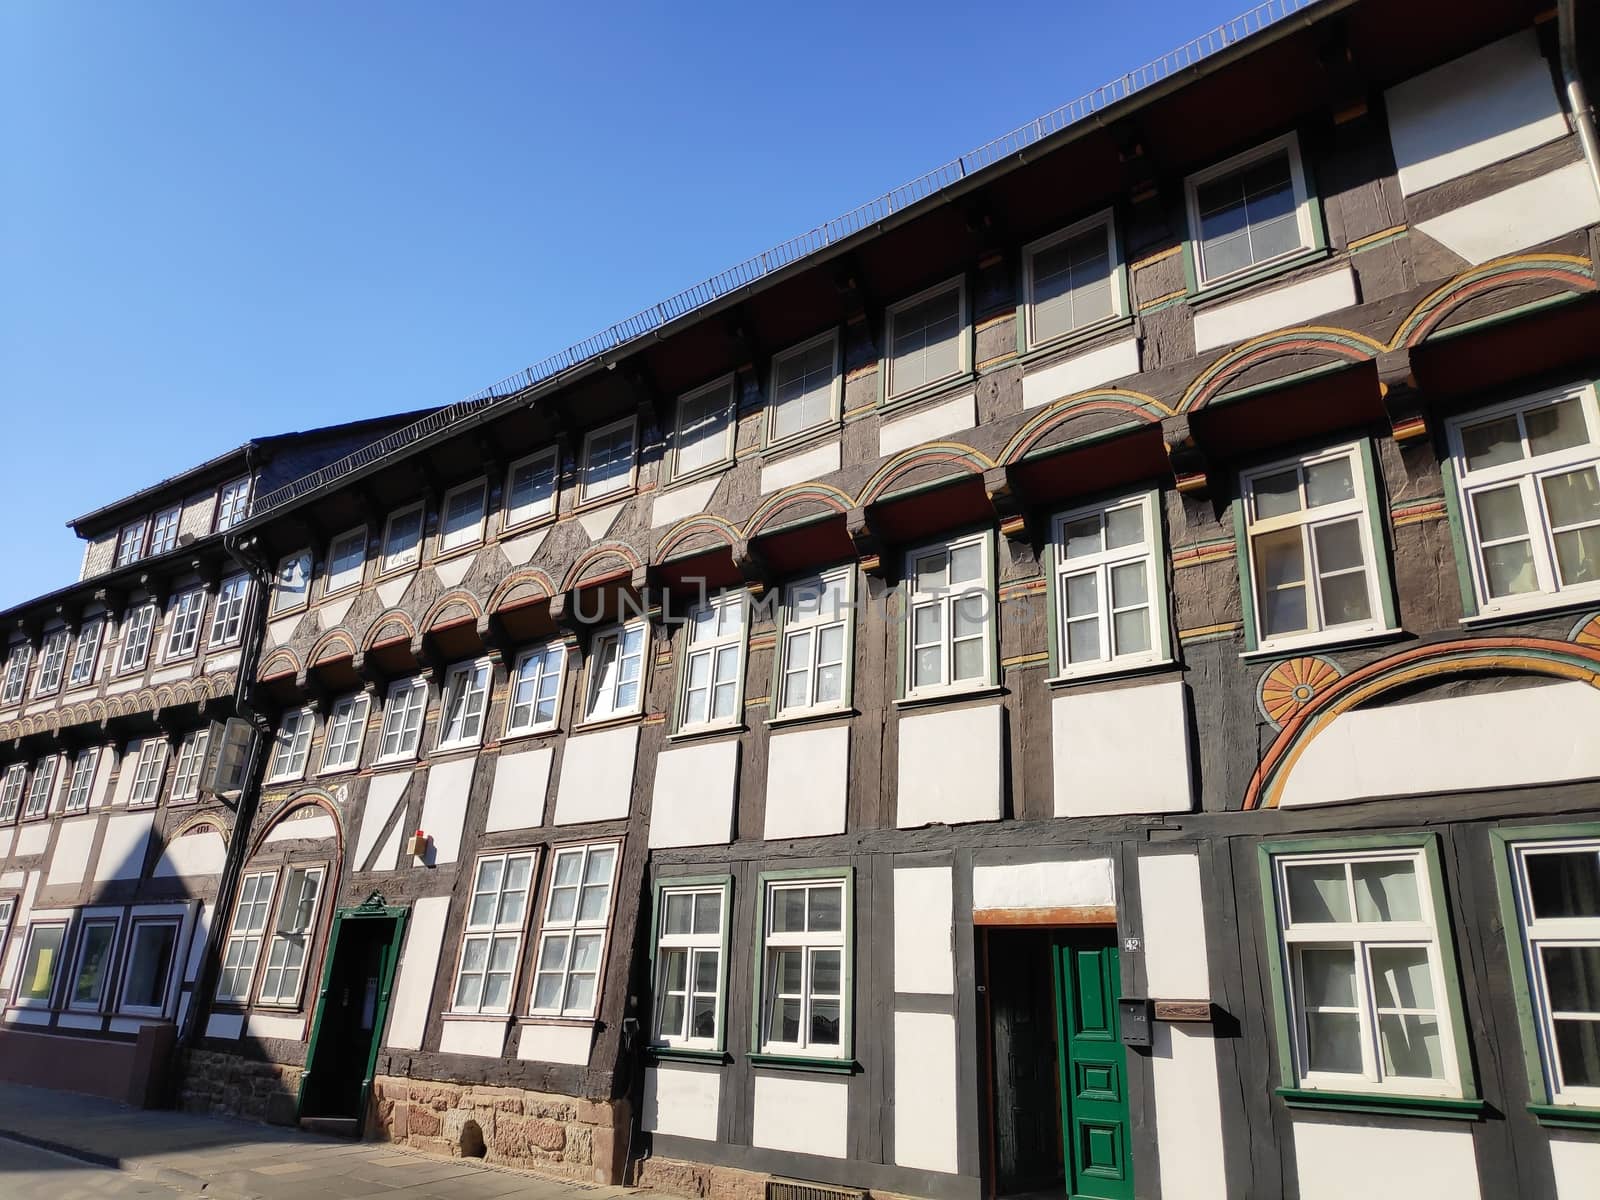 Beautiful half-timbered house in the city of Einbeck by pisces2386